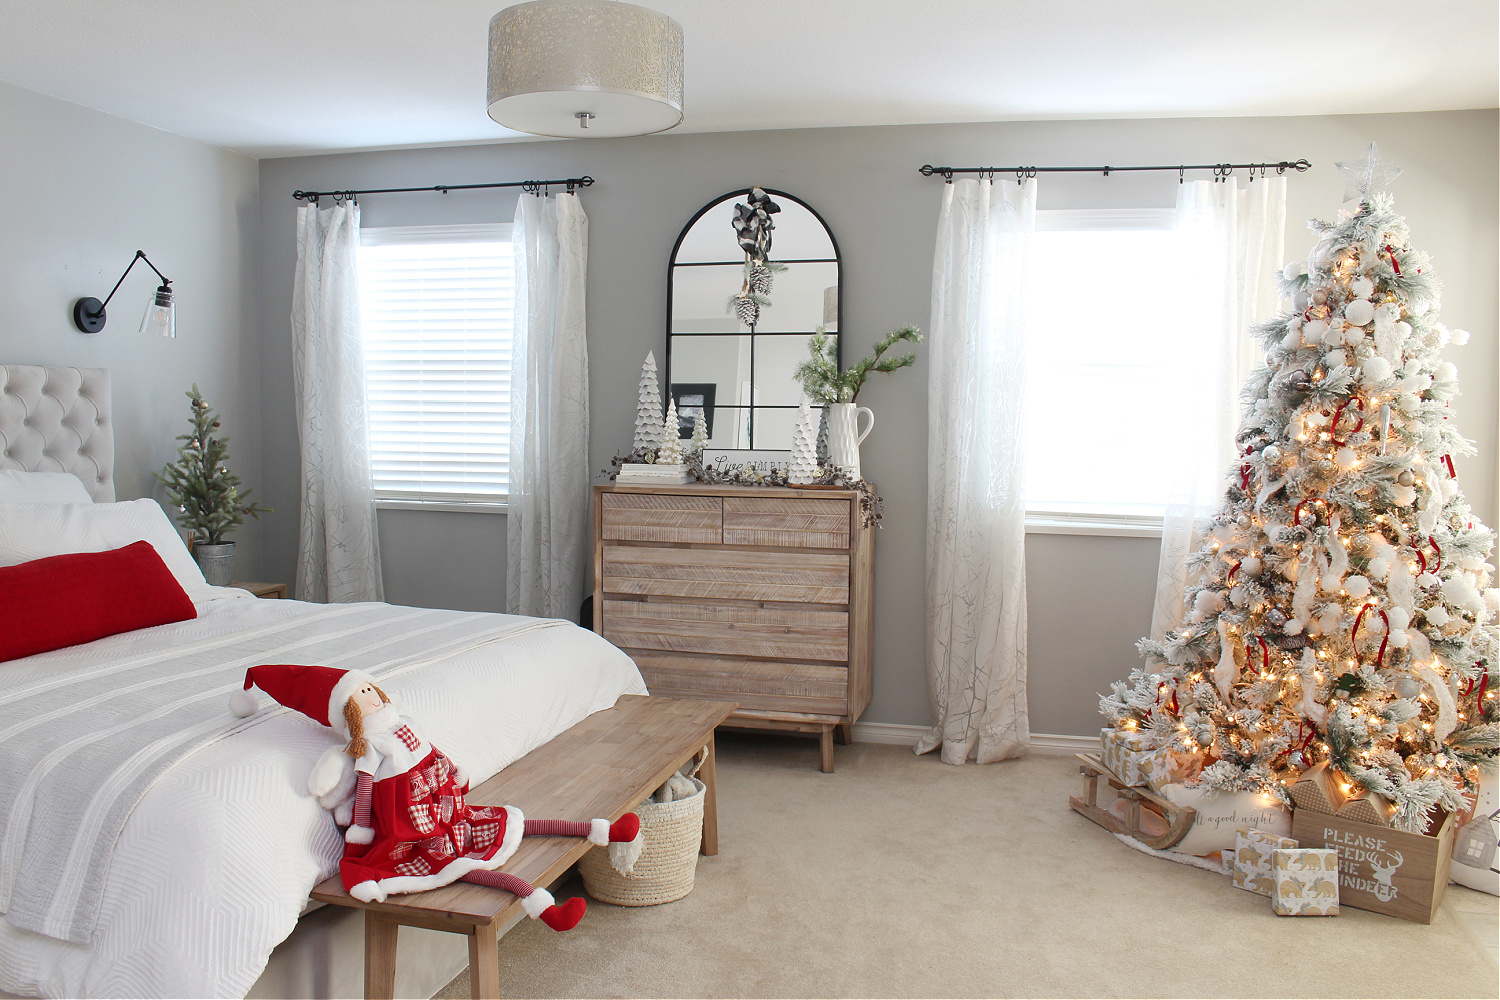 Cozy Christmas bedroom with a Christmas tree and pops of red.